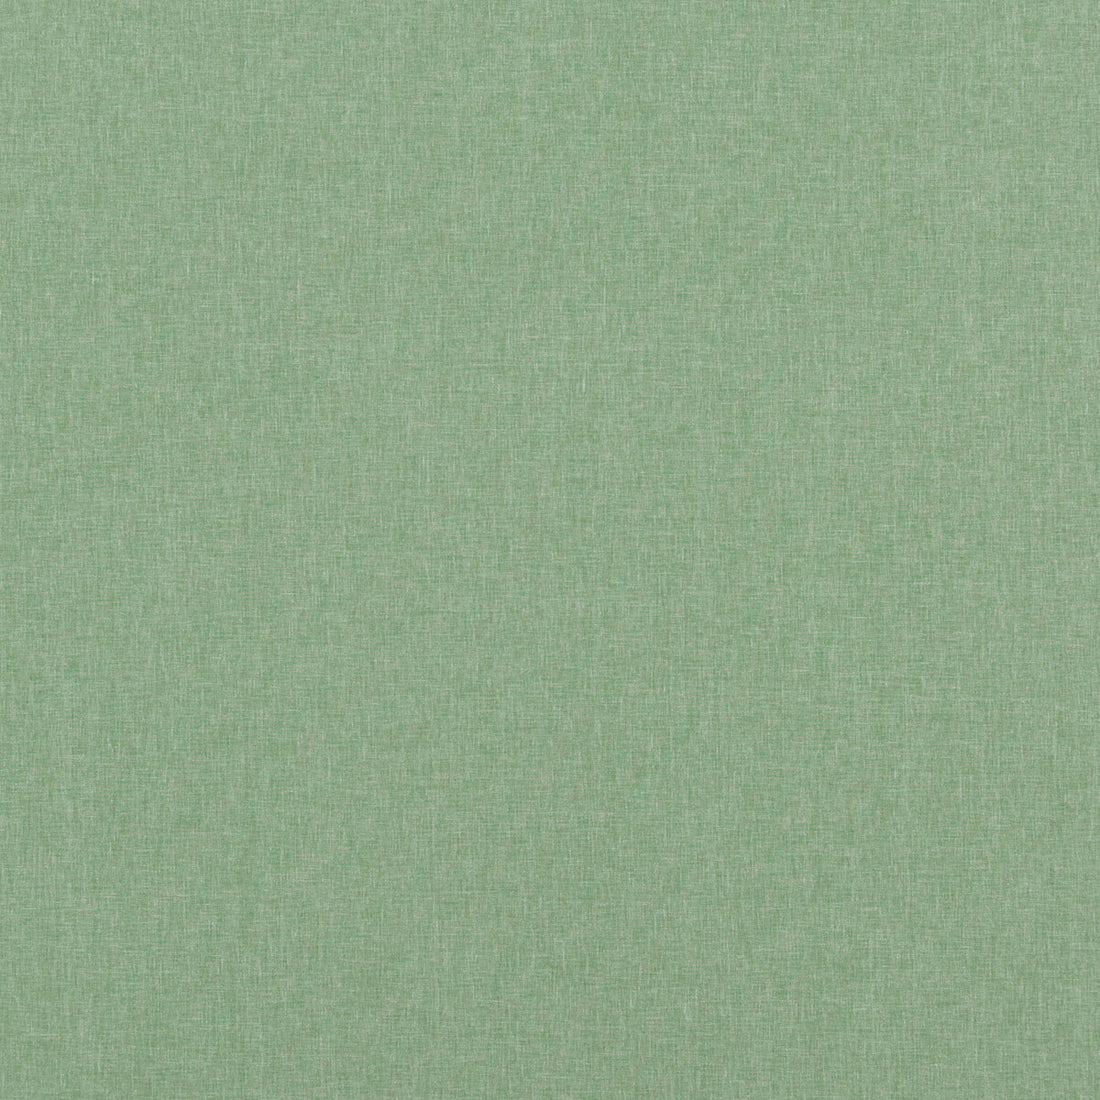 Carnival Plain fabric in emerald color - pattern PF50420.785.0 - by Baker Lifestyle in the Carnival collection